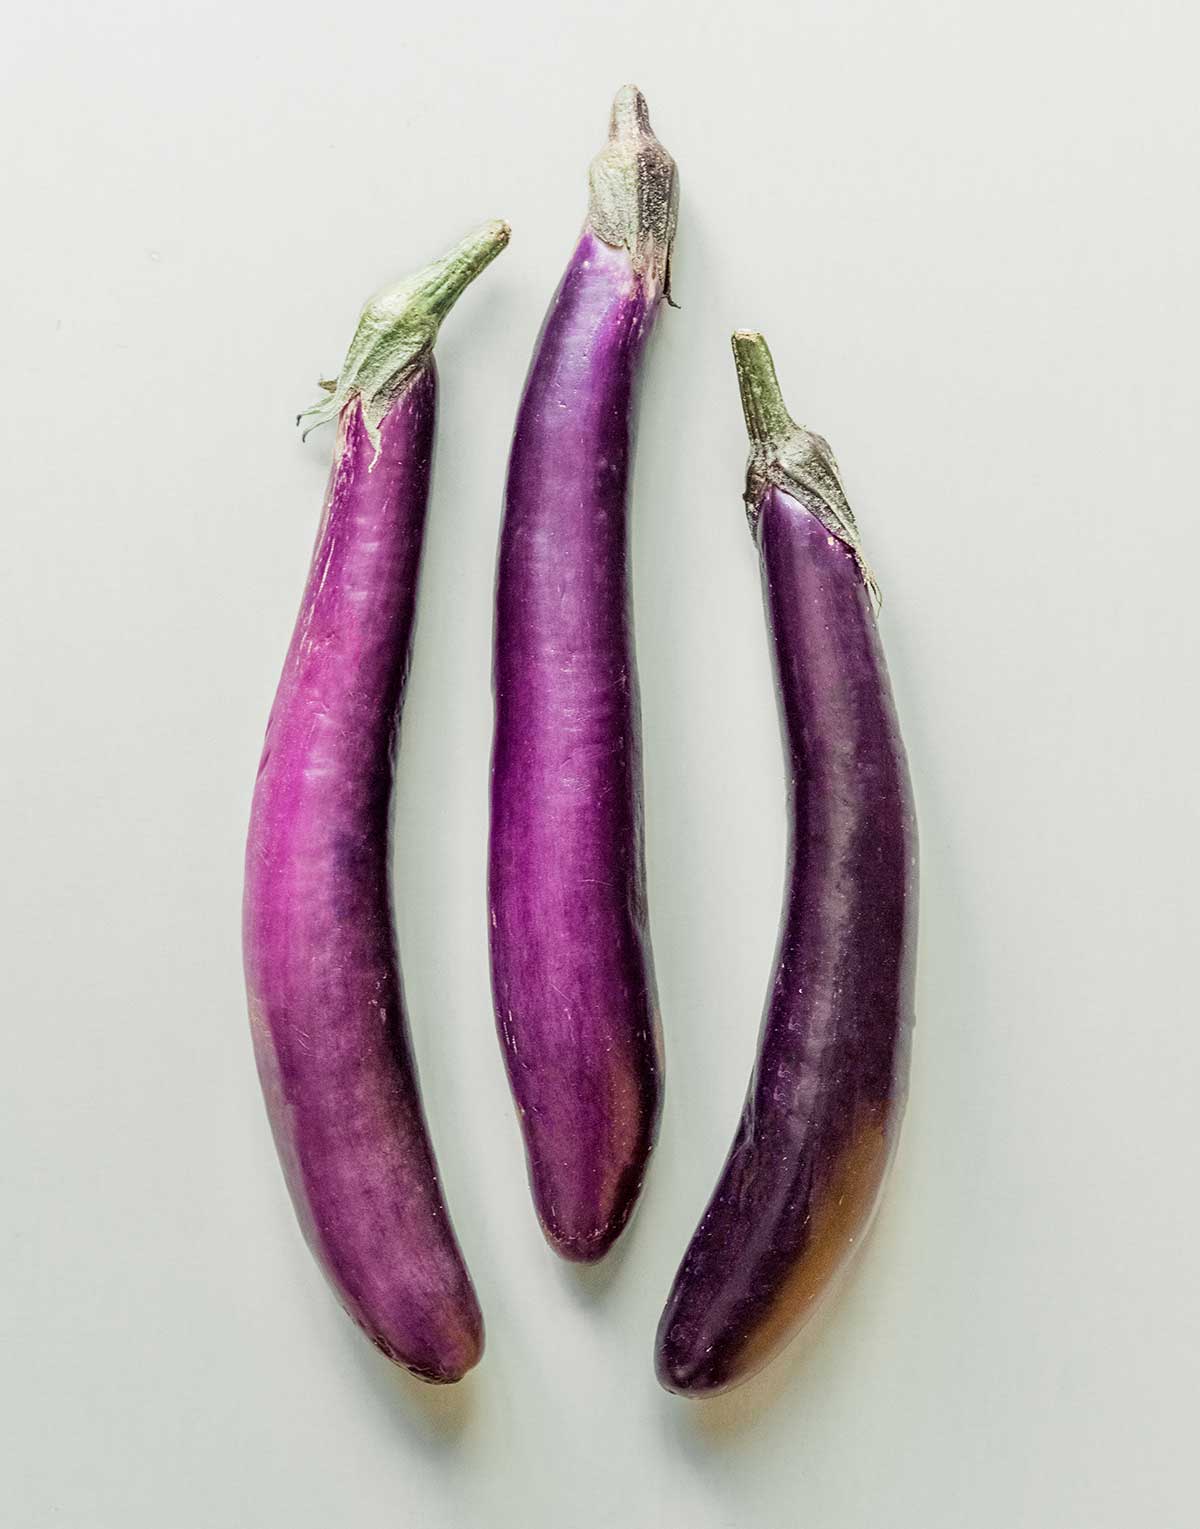 Three Chinese eggplants arranged in a row on a gray background